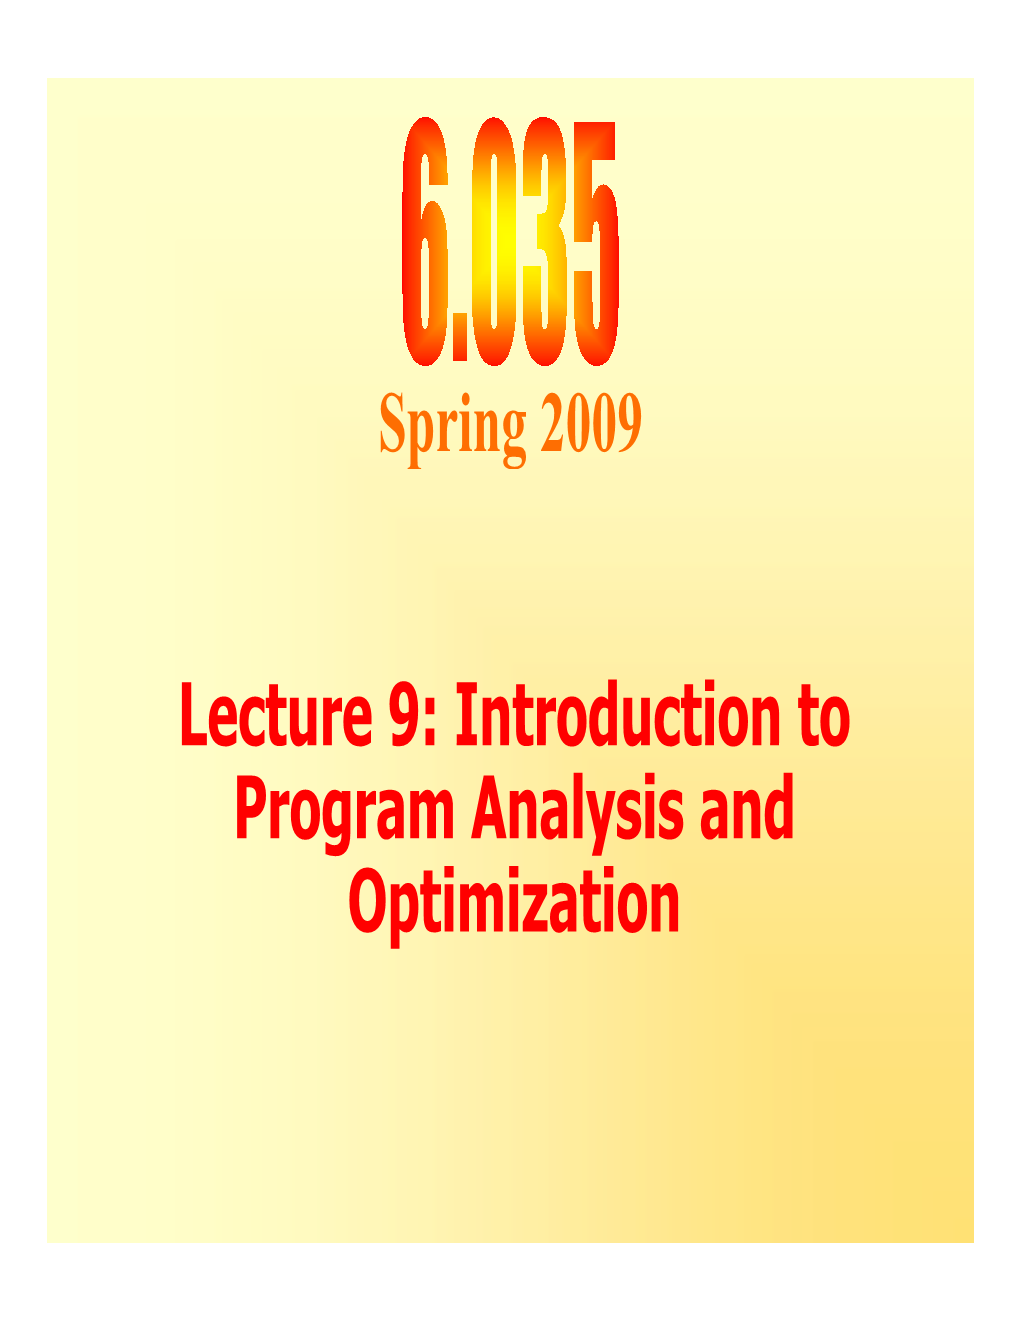 6.035 Lecture 9, Introduction to Program Analysis and Optimization